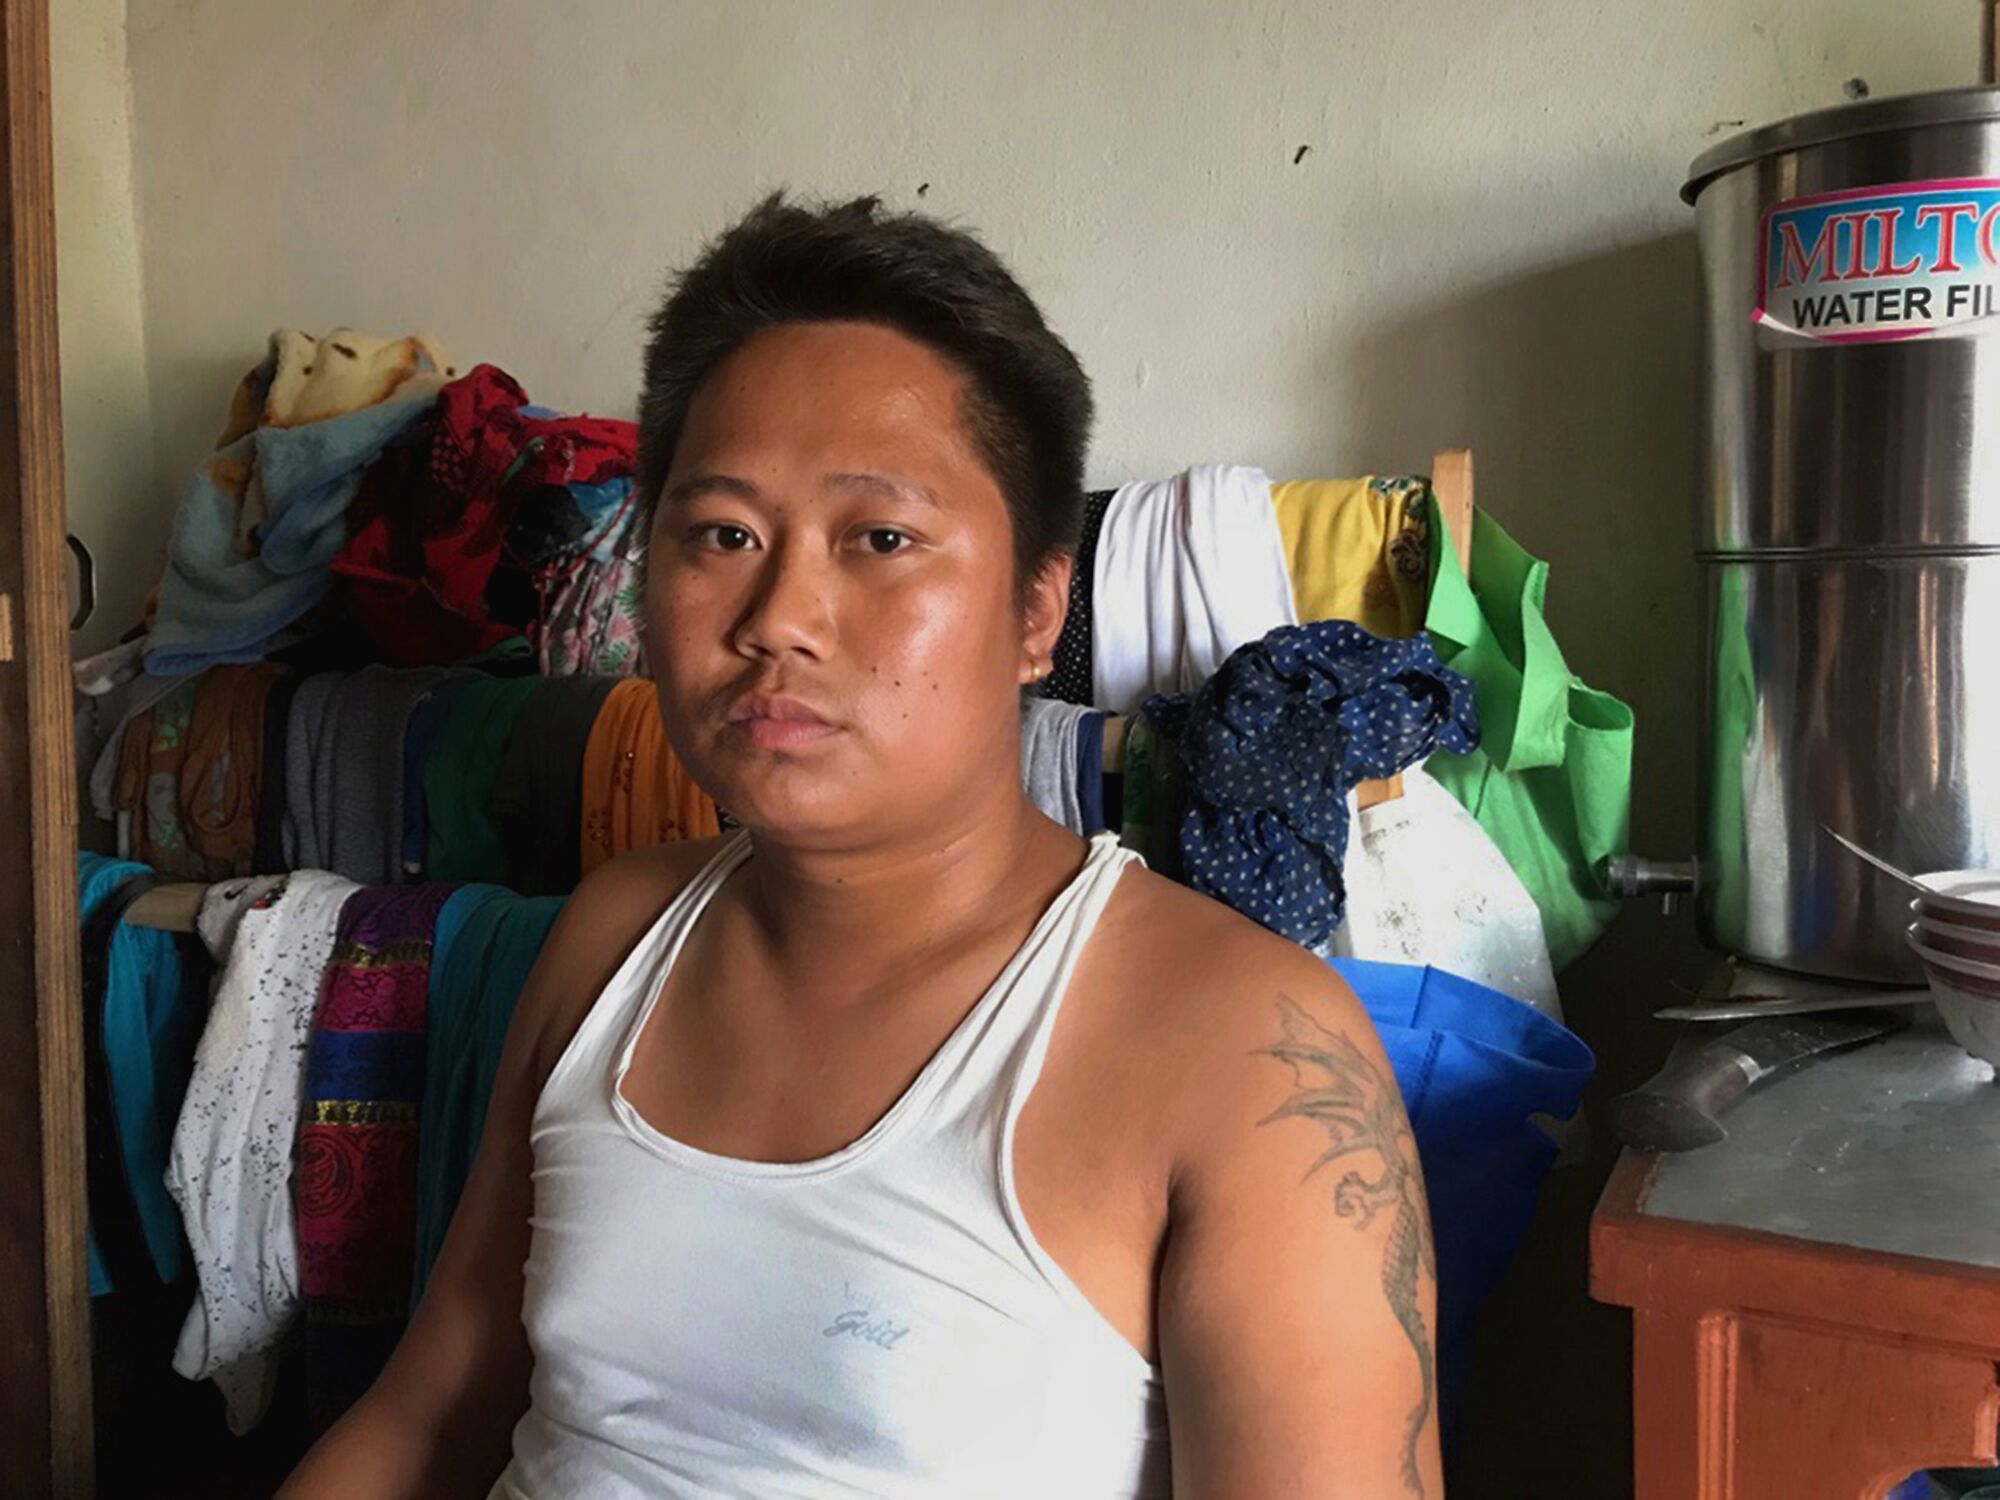 A Nepali man in a white tank top inside his home